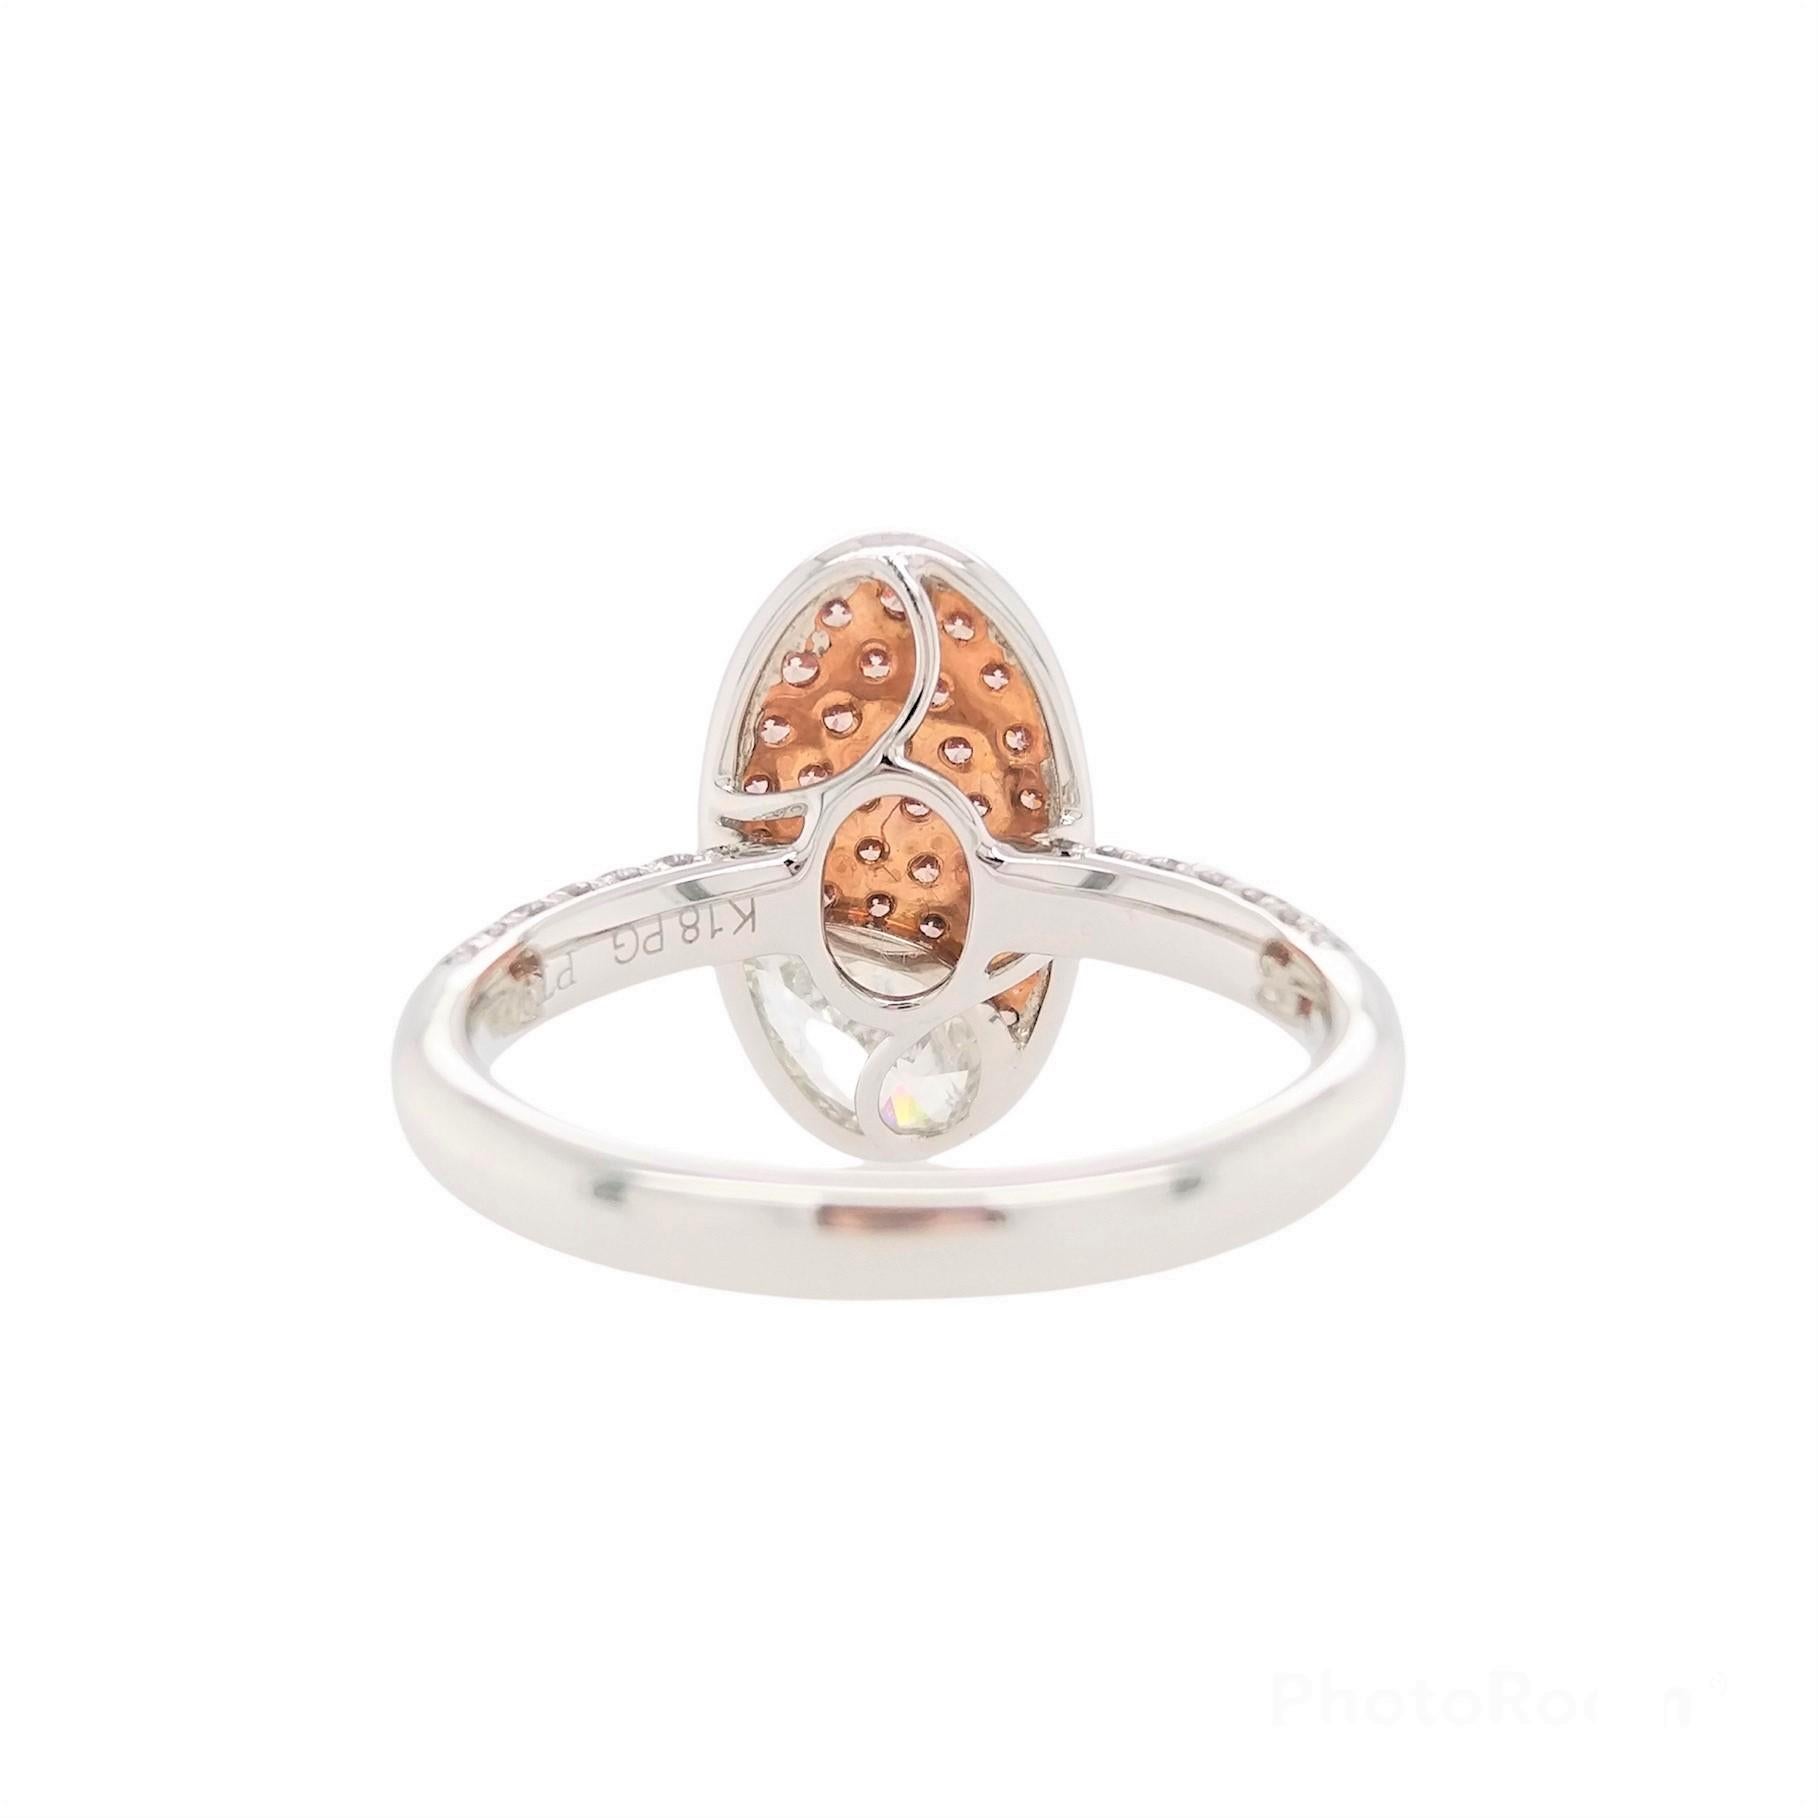 This remarkable platinum ring features an exceptional quality Pear-shape White Diamond at its forefront, accentuated by a bold pattern of natural Argyle Pink Diamonds and scintillating White diamonds. Set in platinum and 18 Karat Pink gold to